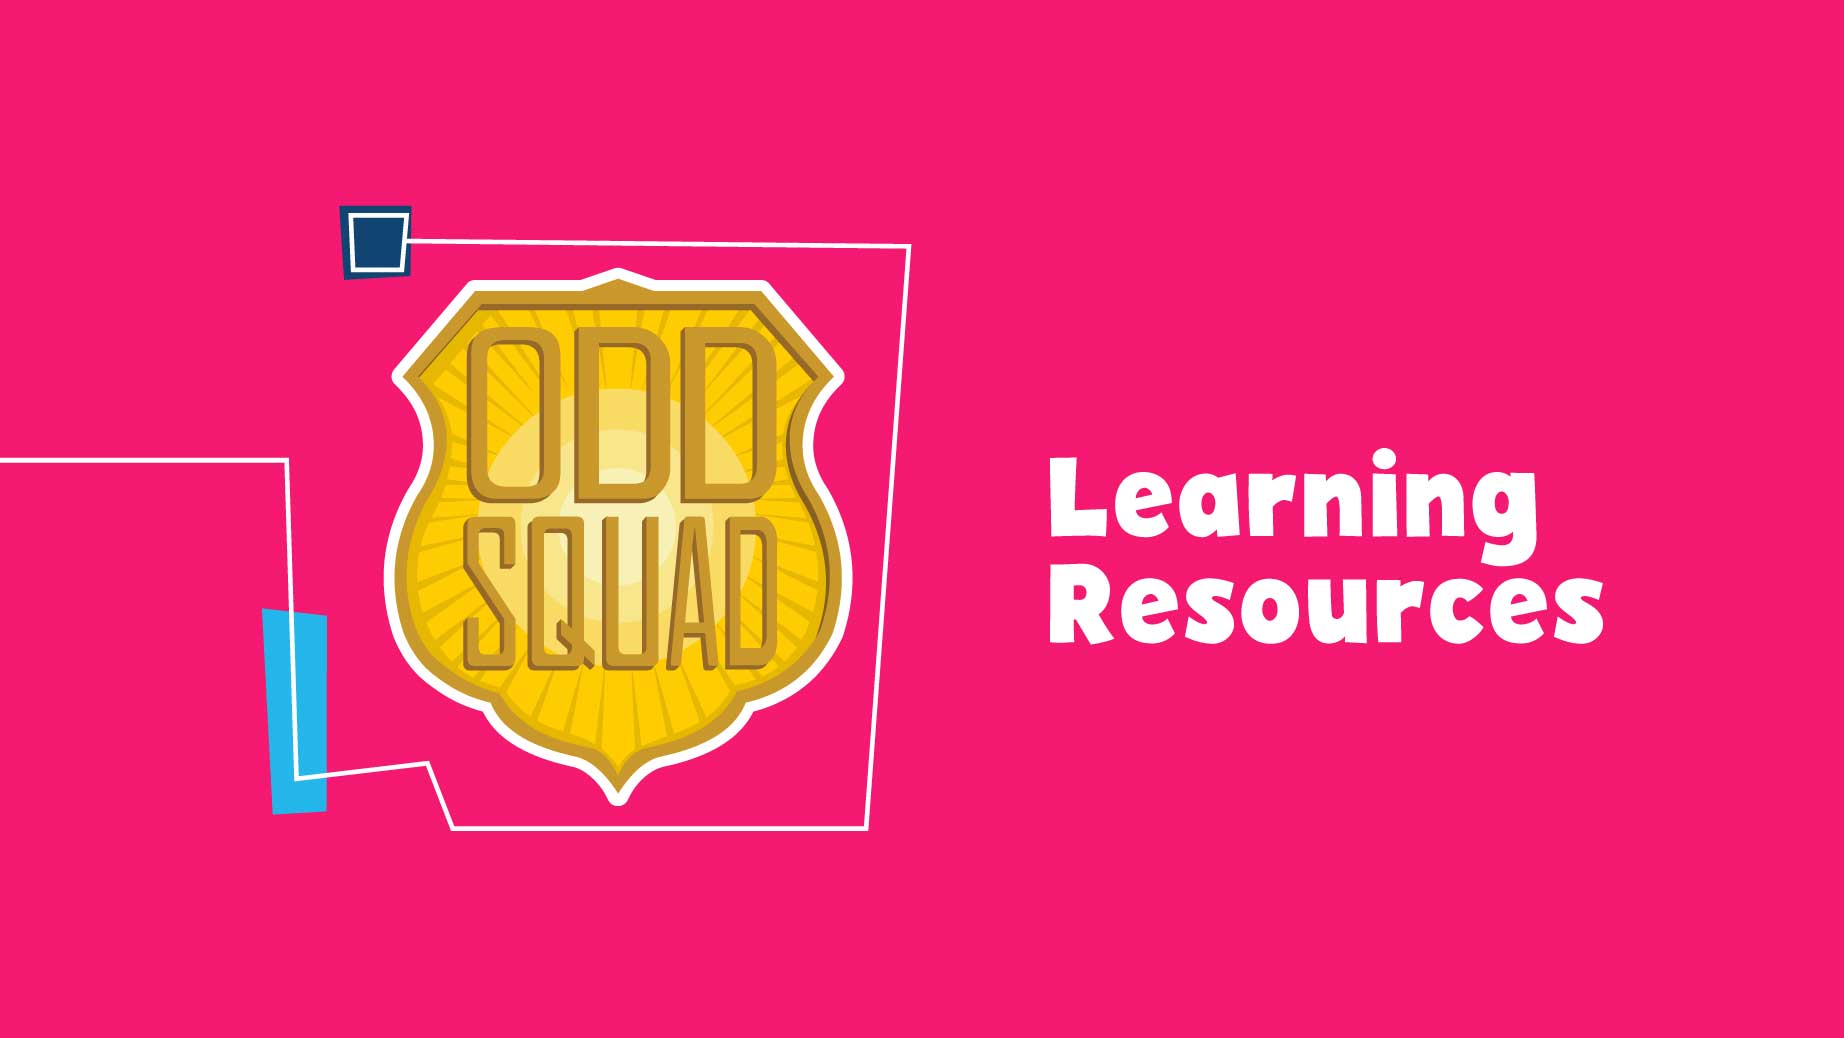 Odd Squad Learning Resources